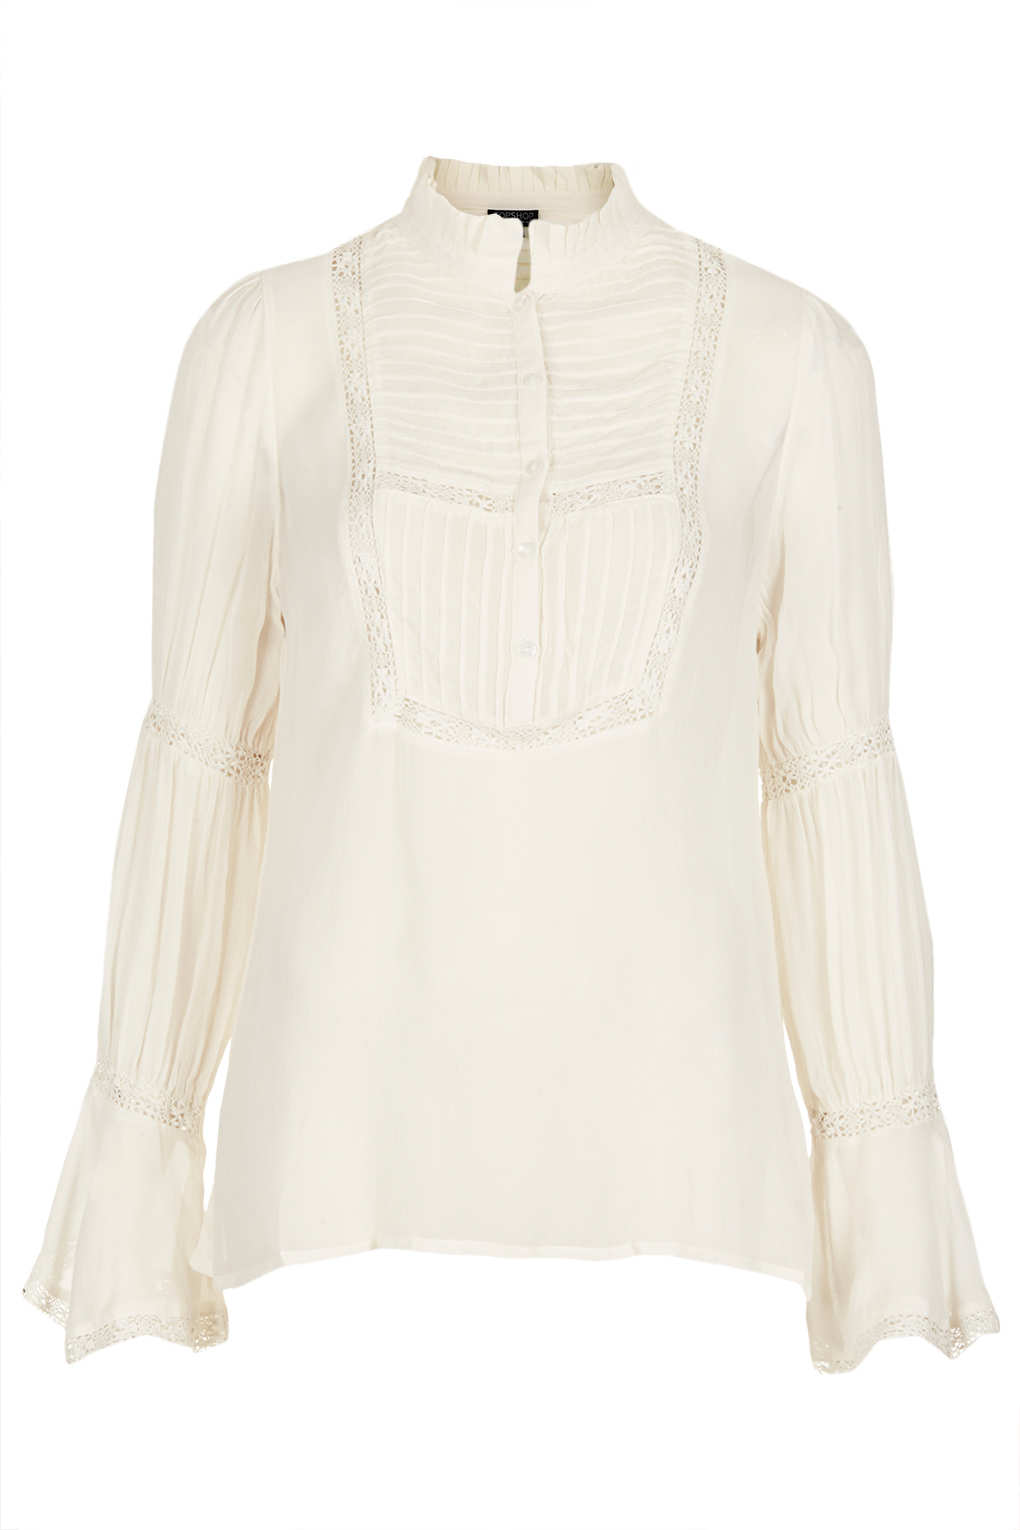 Topshop Frill Collar Lace Blouse in Natural | Lyst